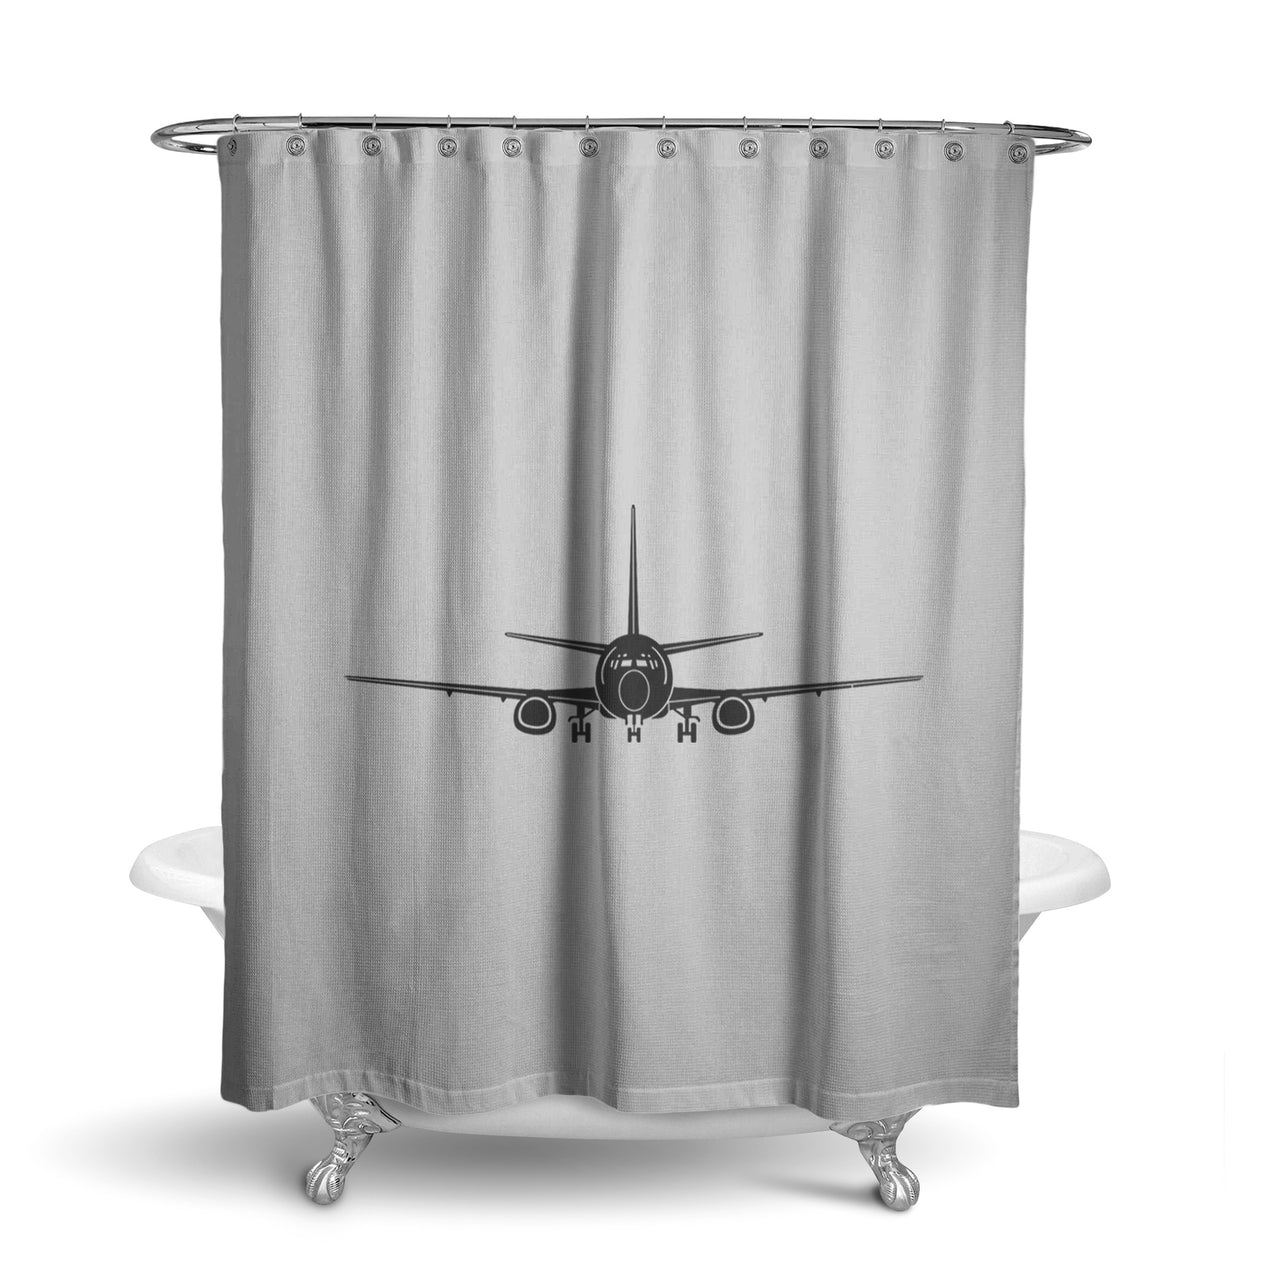 Boeing 737 Silhouette Designed Shower Curtains